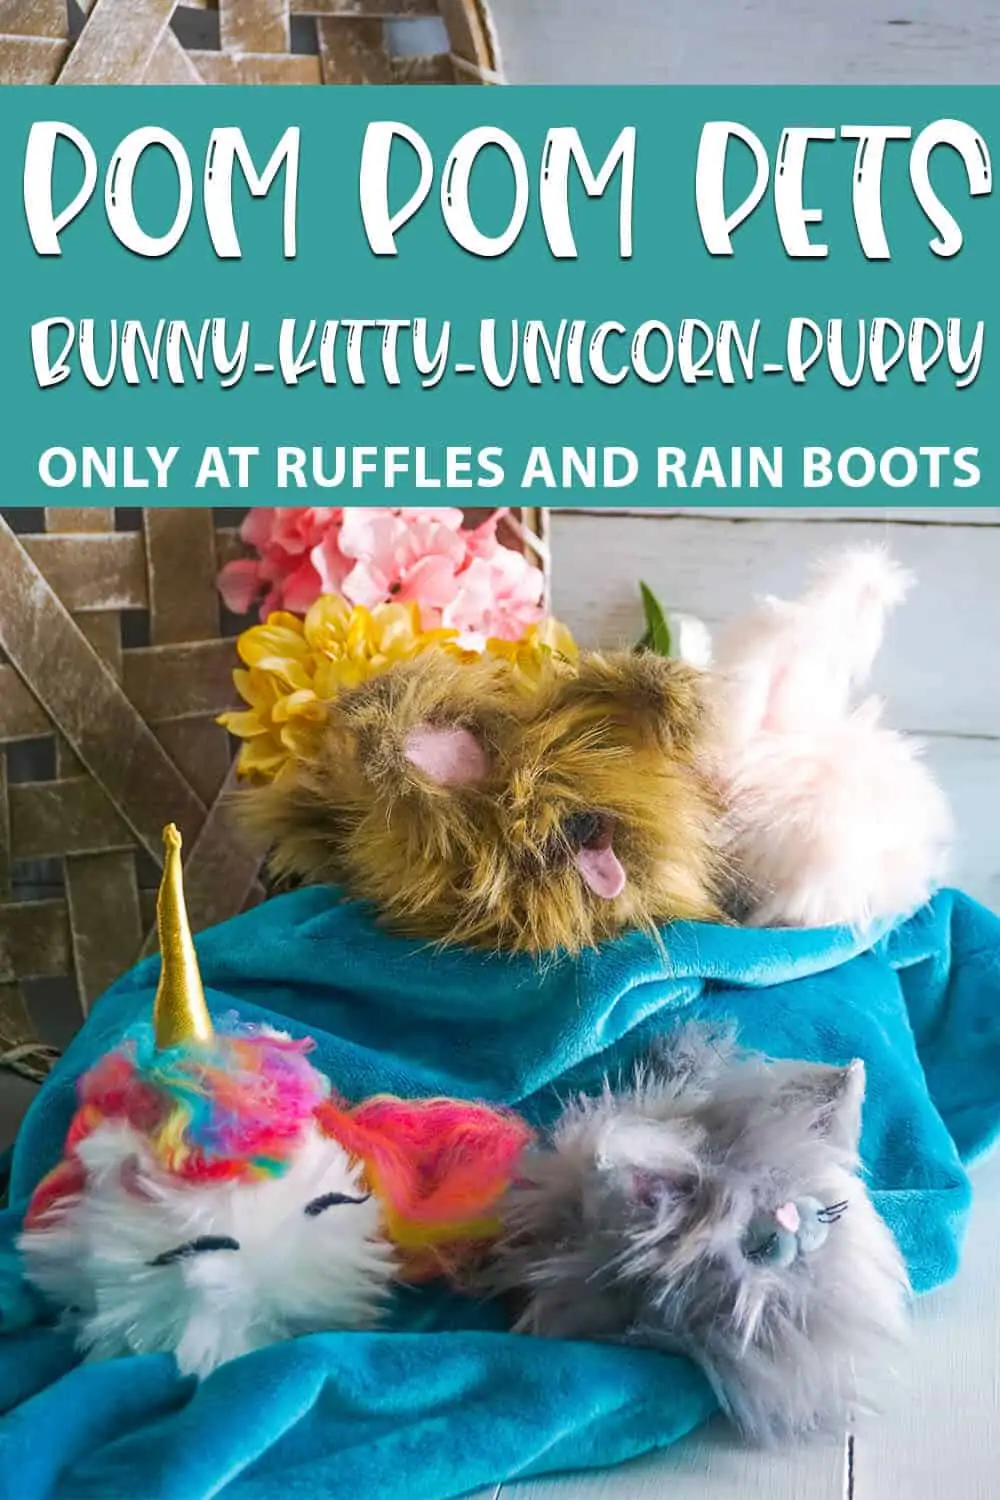 Pom Pom Pets pattern for gnome pets with text which reads pom pom pets bunny kitty unicorn puppy